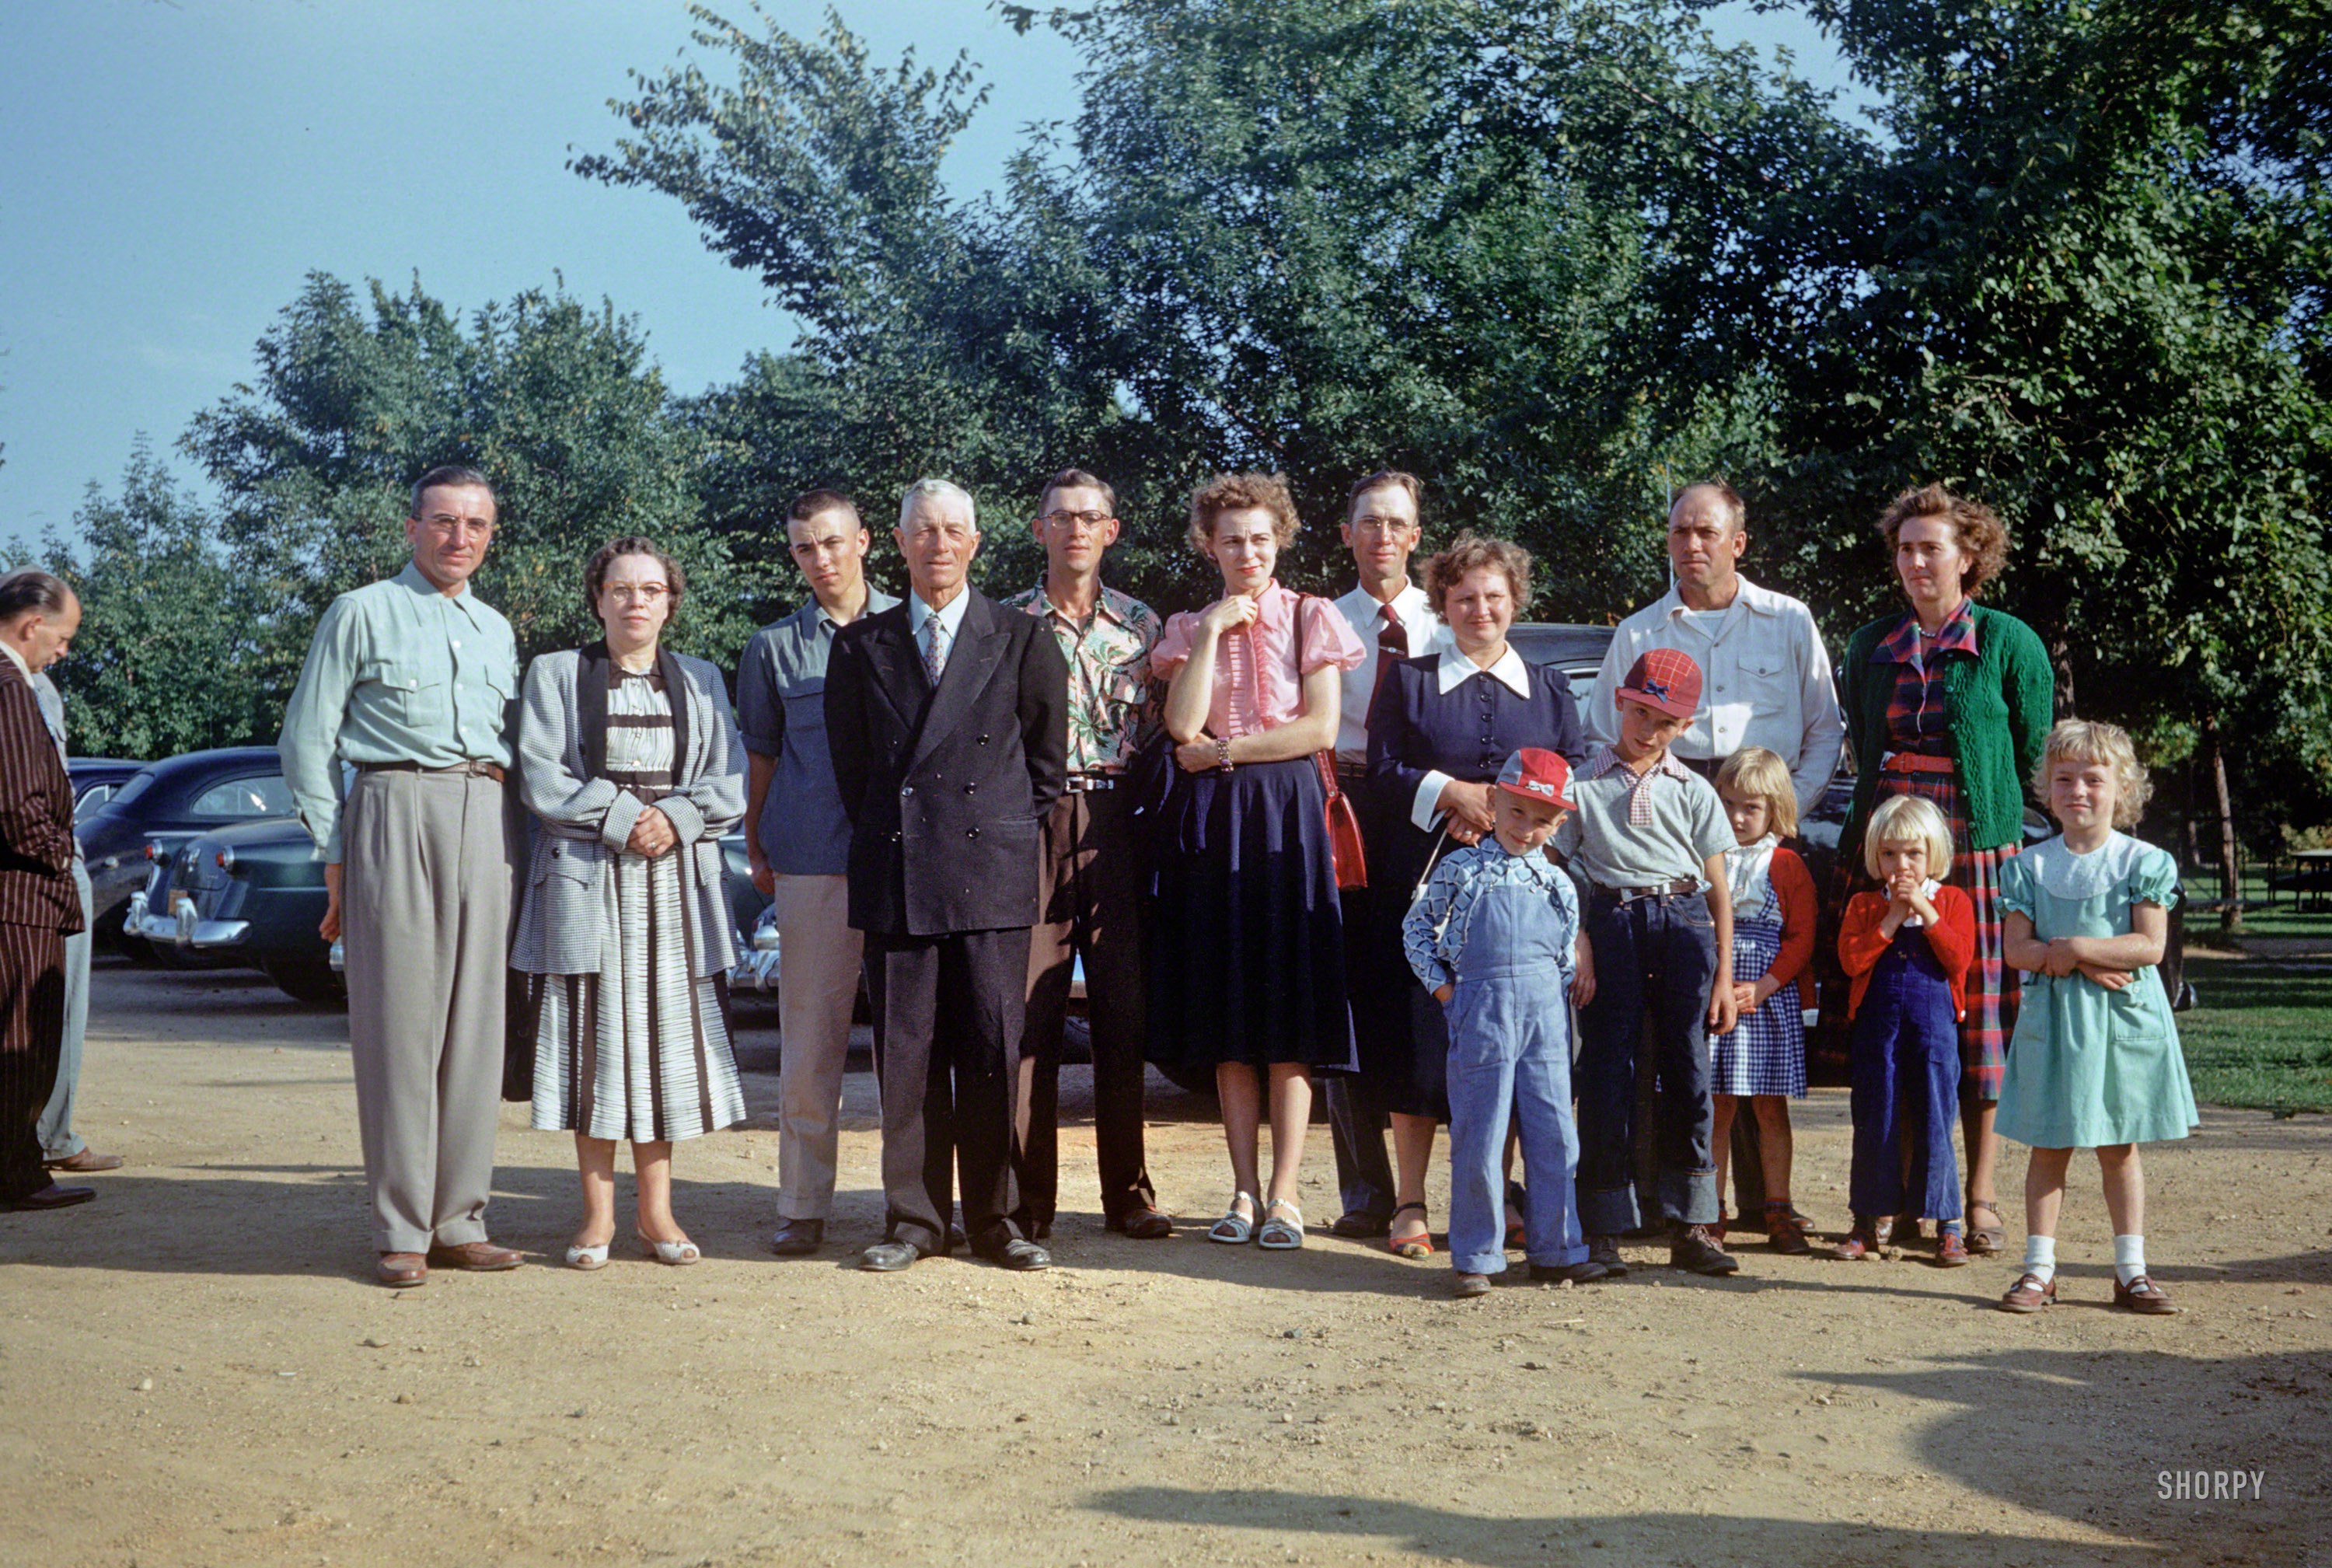 "Picnic at Austin, Minn. -- 7 Sept. 1952." Although the trees are still green and it's technically still summer, the native fauna's coats are thickening, ready to blend in when autumn arrives. Kodachrome slide by Hubert Tuttle. View full size.